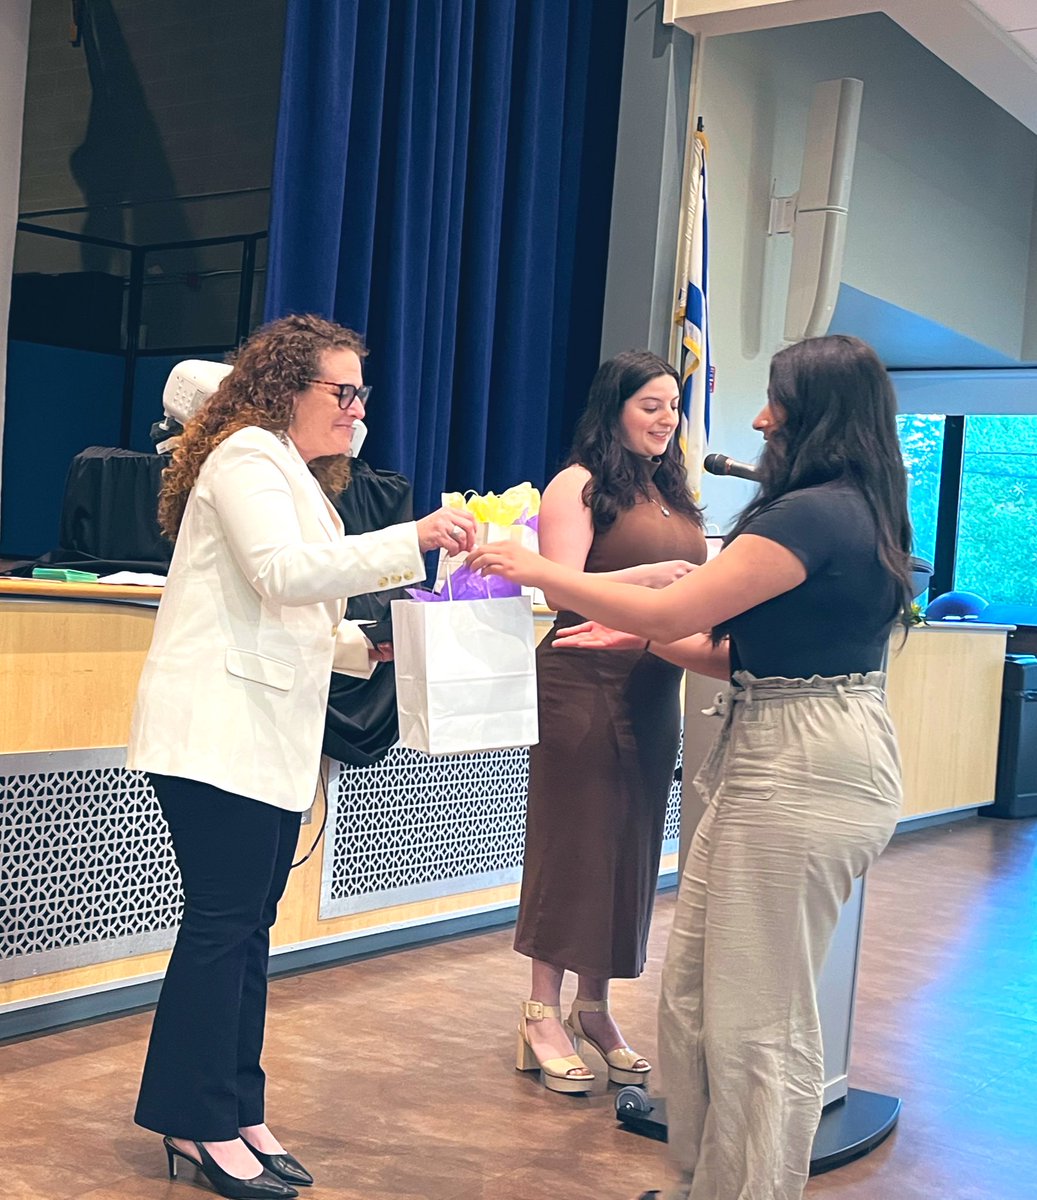 I was honored to be asked to participate in the installation of new officers for the Sandra Bornstein Holocaust Education Center. The Center has been an invaluable community resource for 30+ years, promoting acceptance and understanding through education.